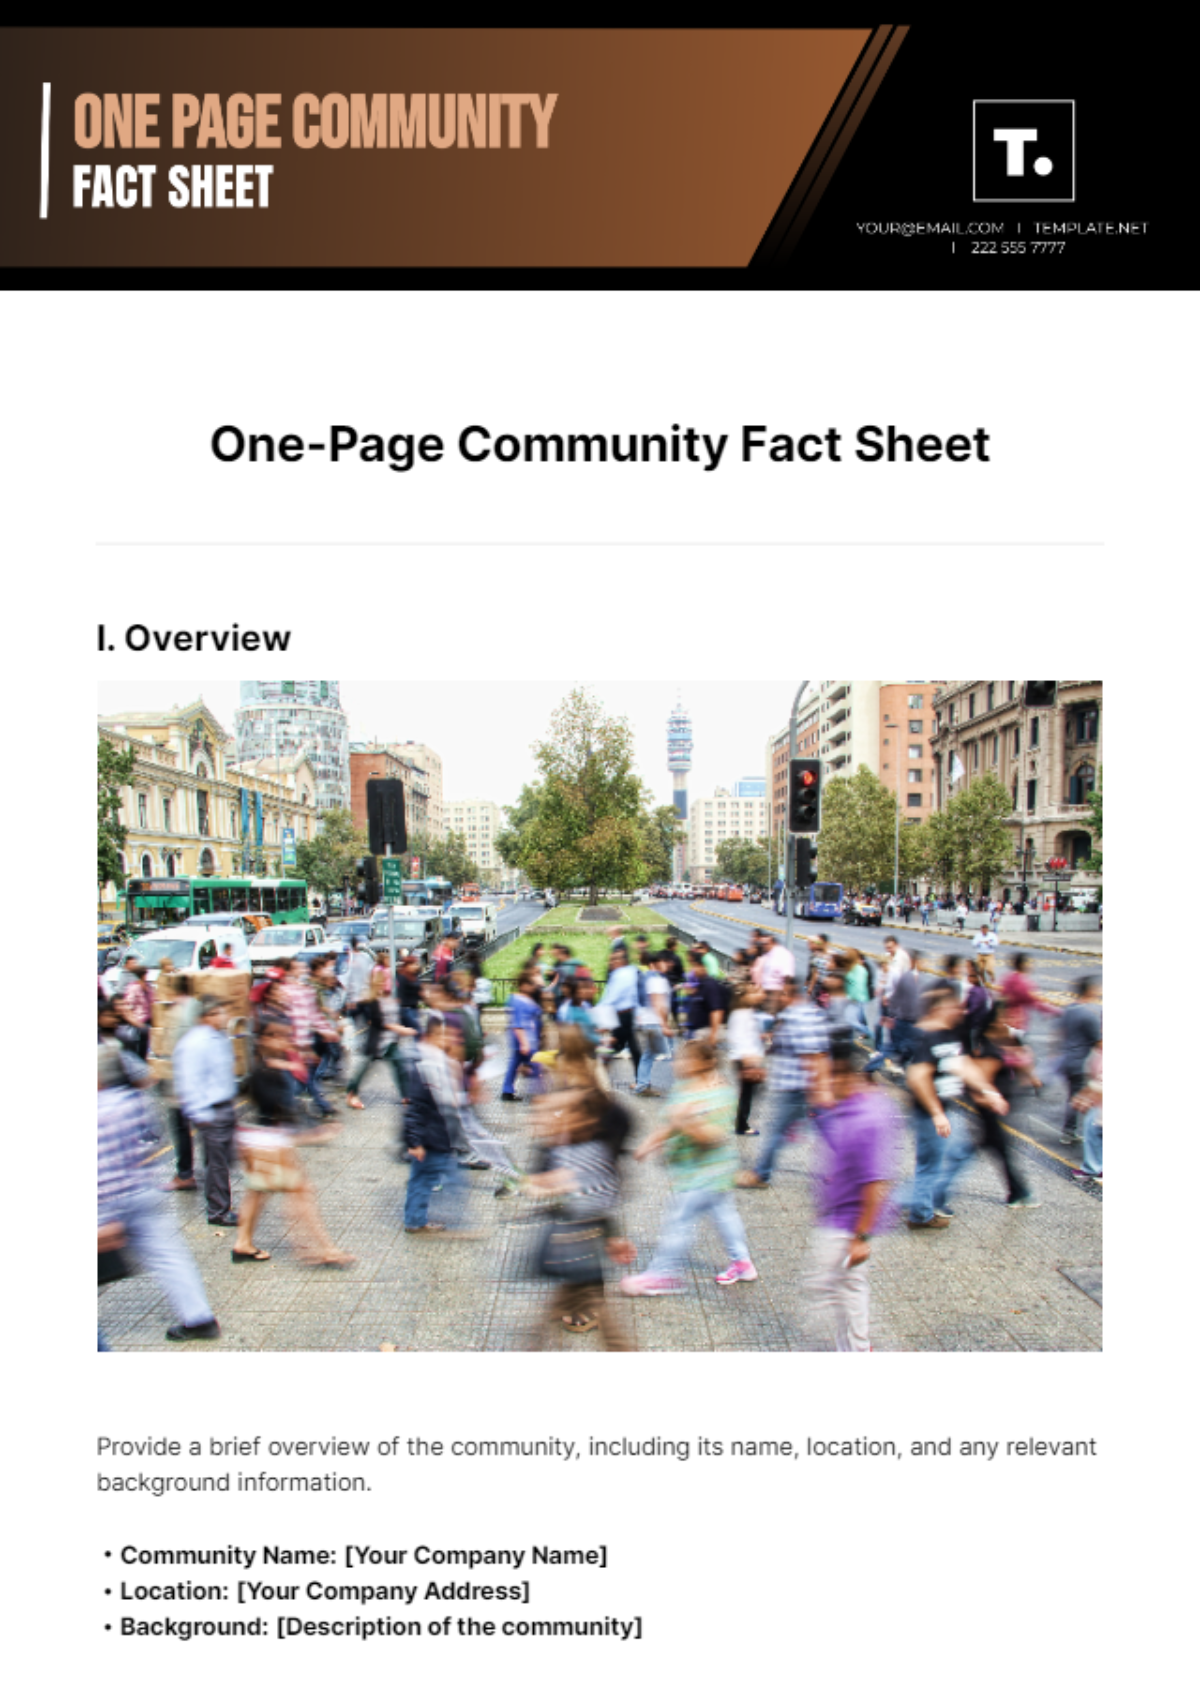 One-Page Community Fact Sheet Template